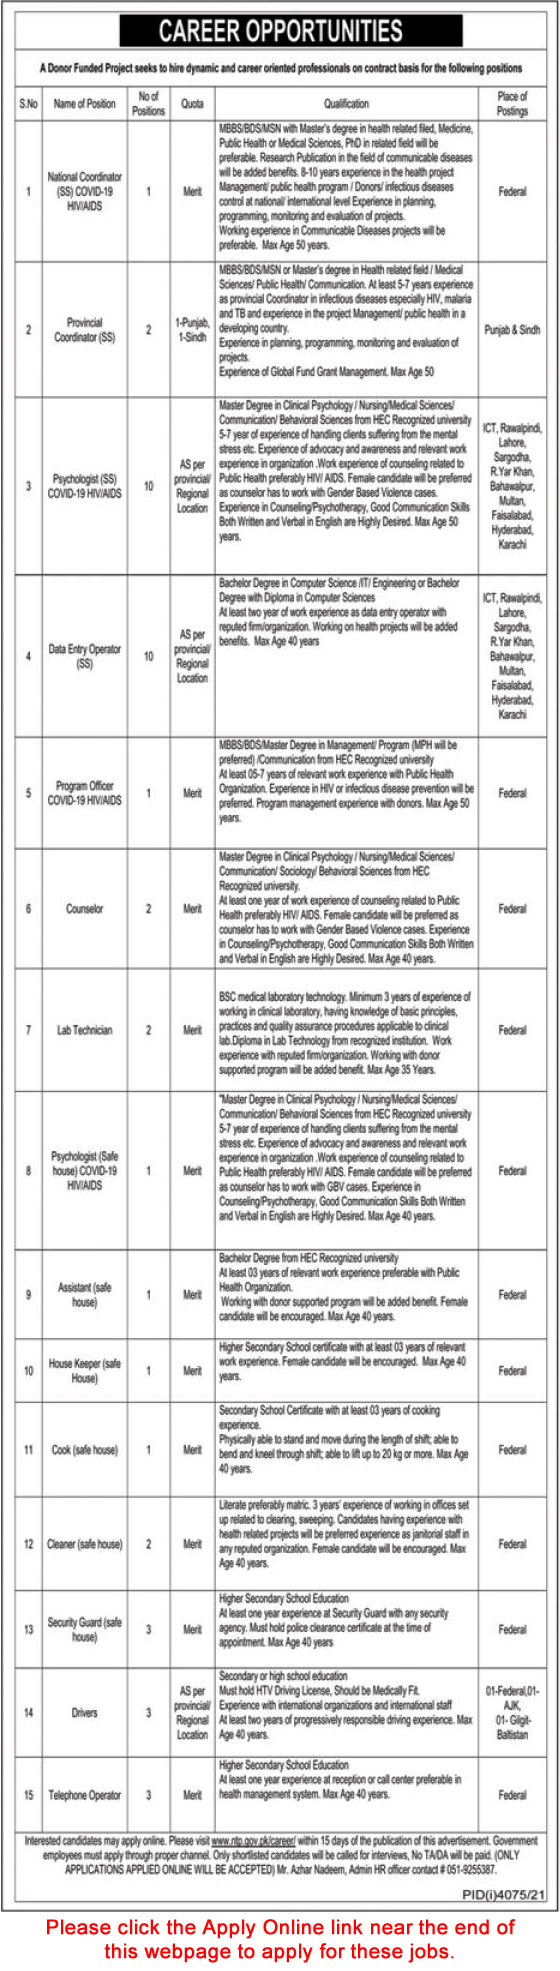 National TB Control Program Jobs December 2021 Apply Online Data Entry Operators, Psychologists & Others Latest